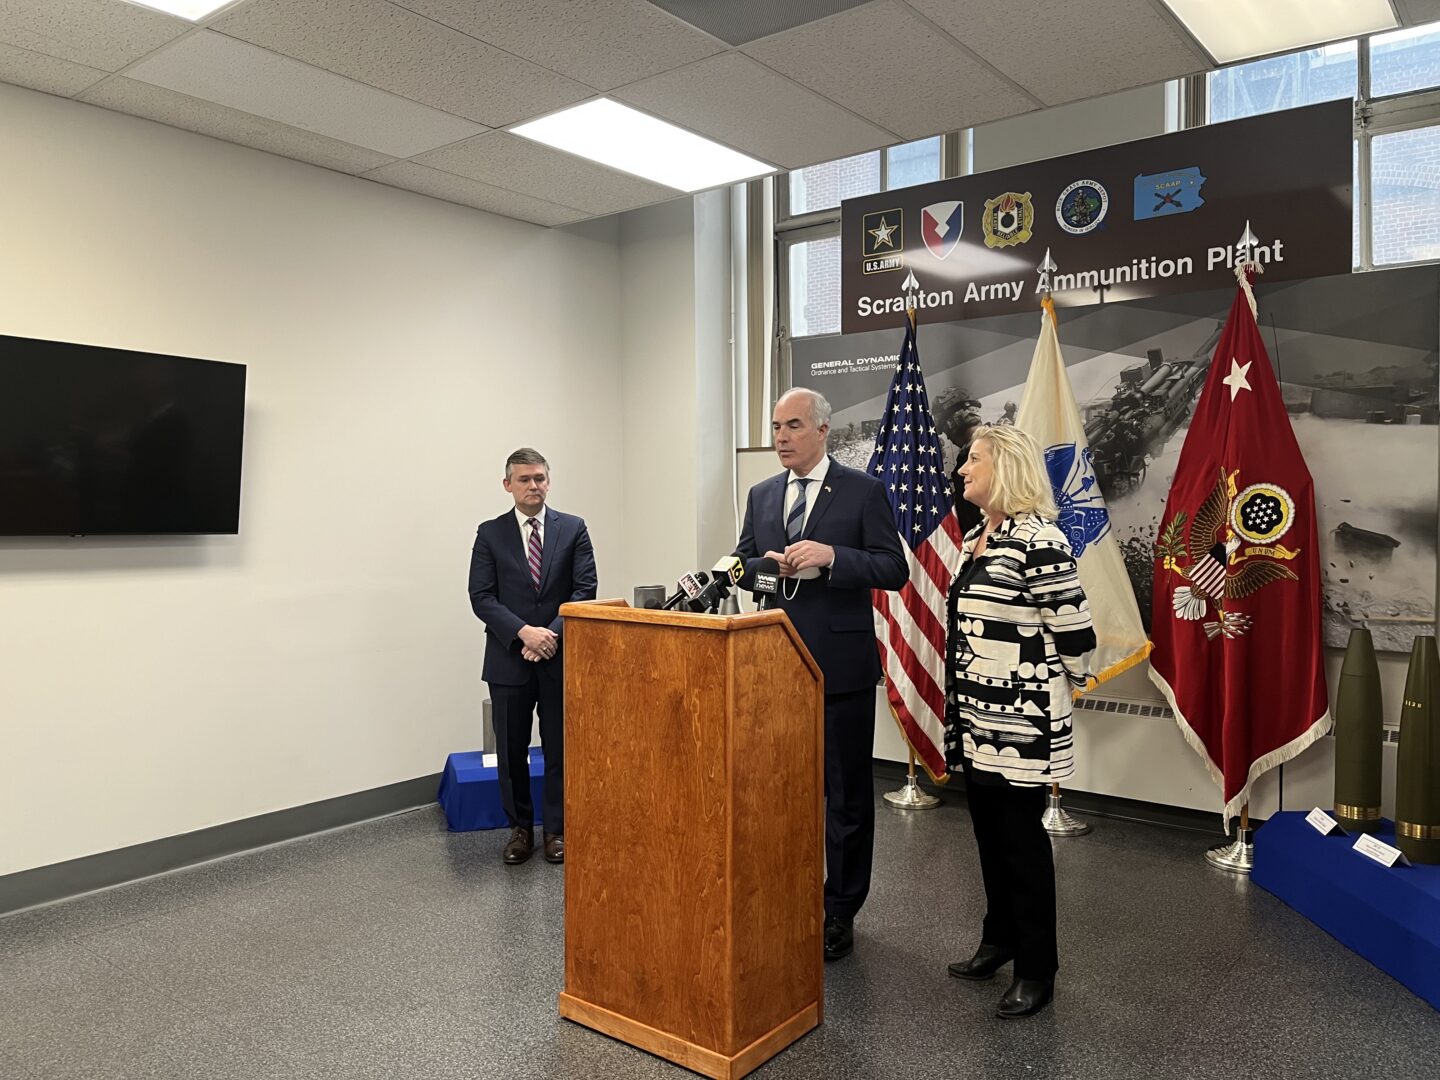 U.S. Senator Bob Casey, center, speaks alongside the 25th Secretary of the Army Christine Wormuth, right, at the Scranton Ammunition Plant on Feb. 6. Douglas R. Bush, U.S. Assistant Secretary of the Army for Acquisition, Logistics and Technology, stands at left. 